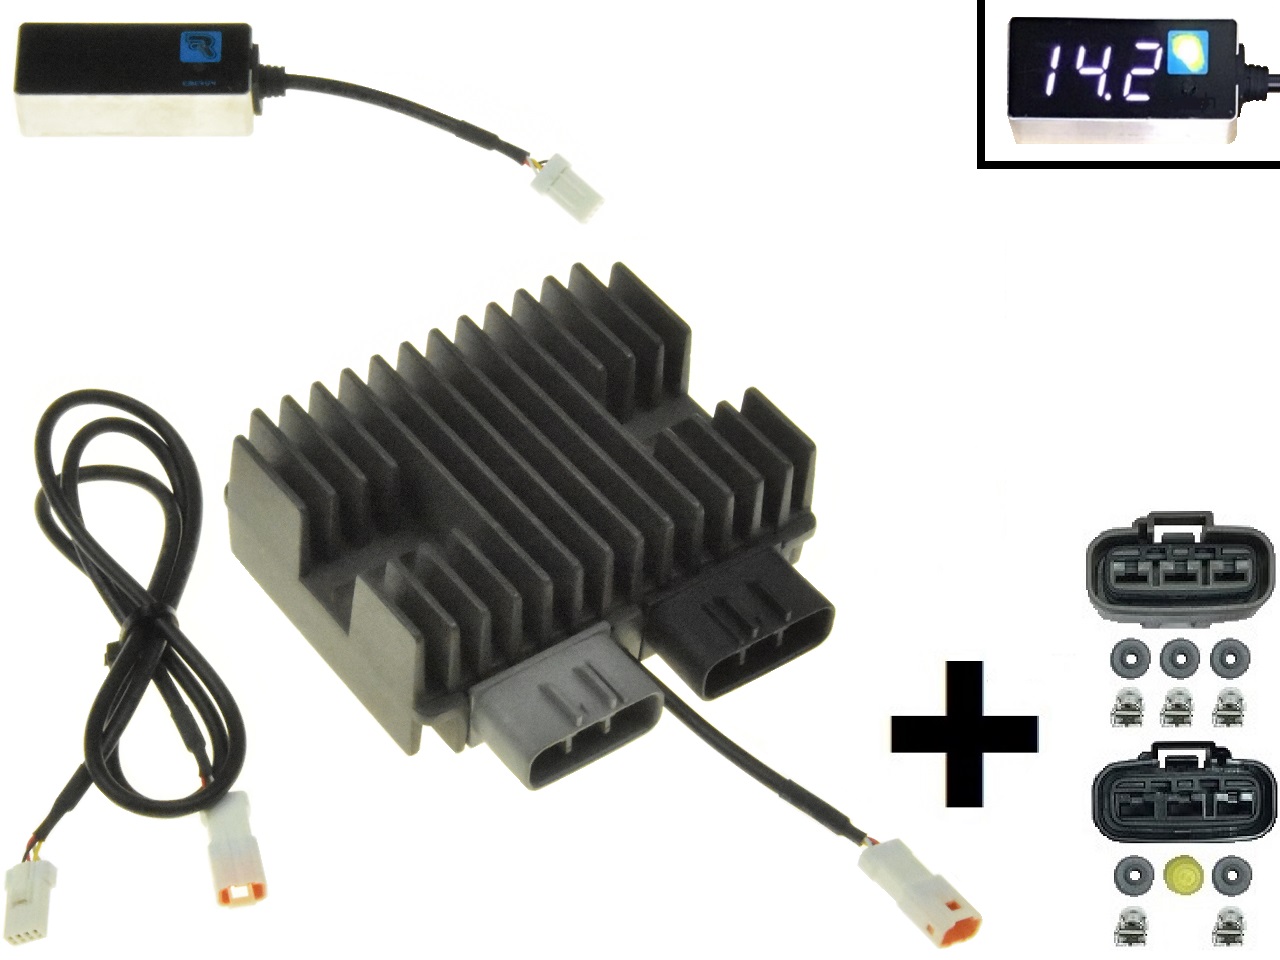 CARR5925-SERIE - MOSFET SERIE SERIES + CHECK Voltage regulator rectifier (improved SH847) 12V/50A/700W + connectors - Click Image to Close